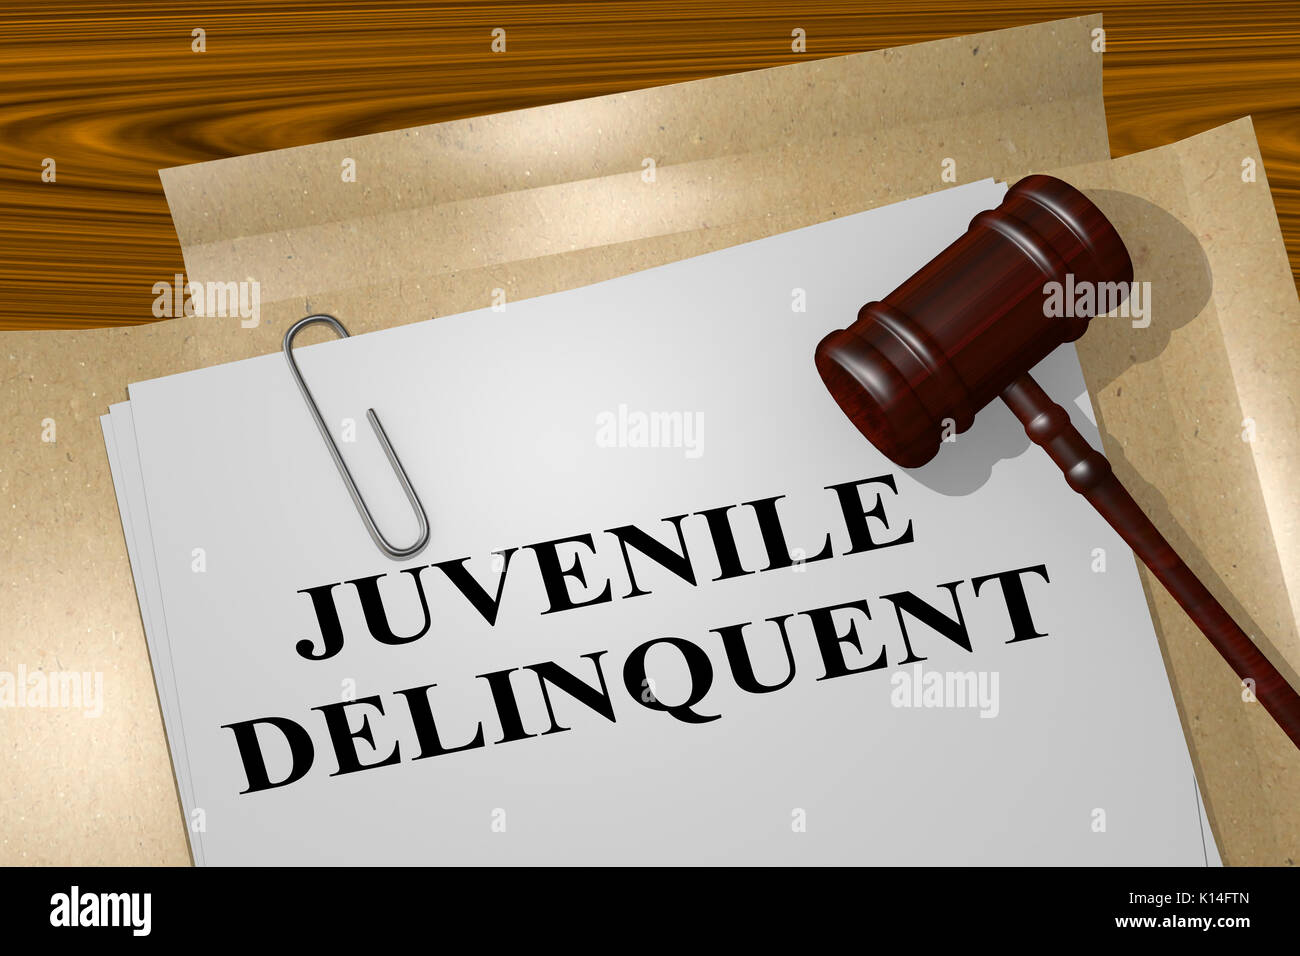 3D illustration of 'JUVENILE DELINQUENT' title on legal document Stock Photo